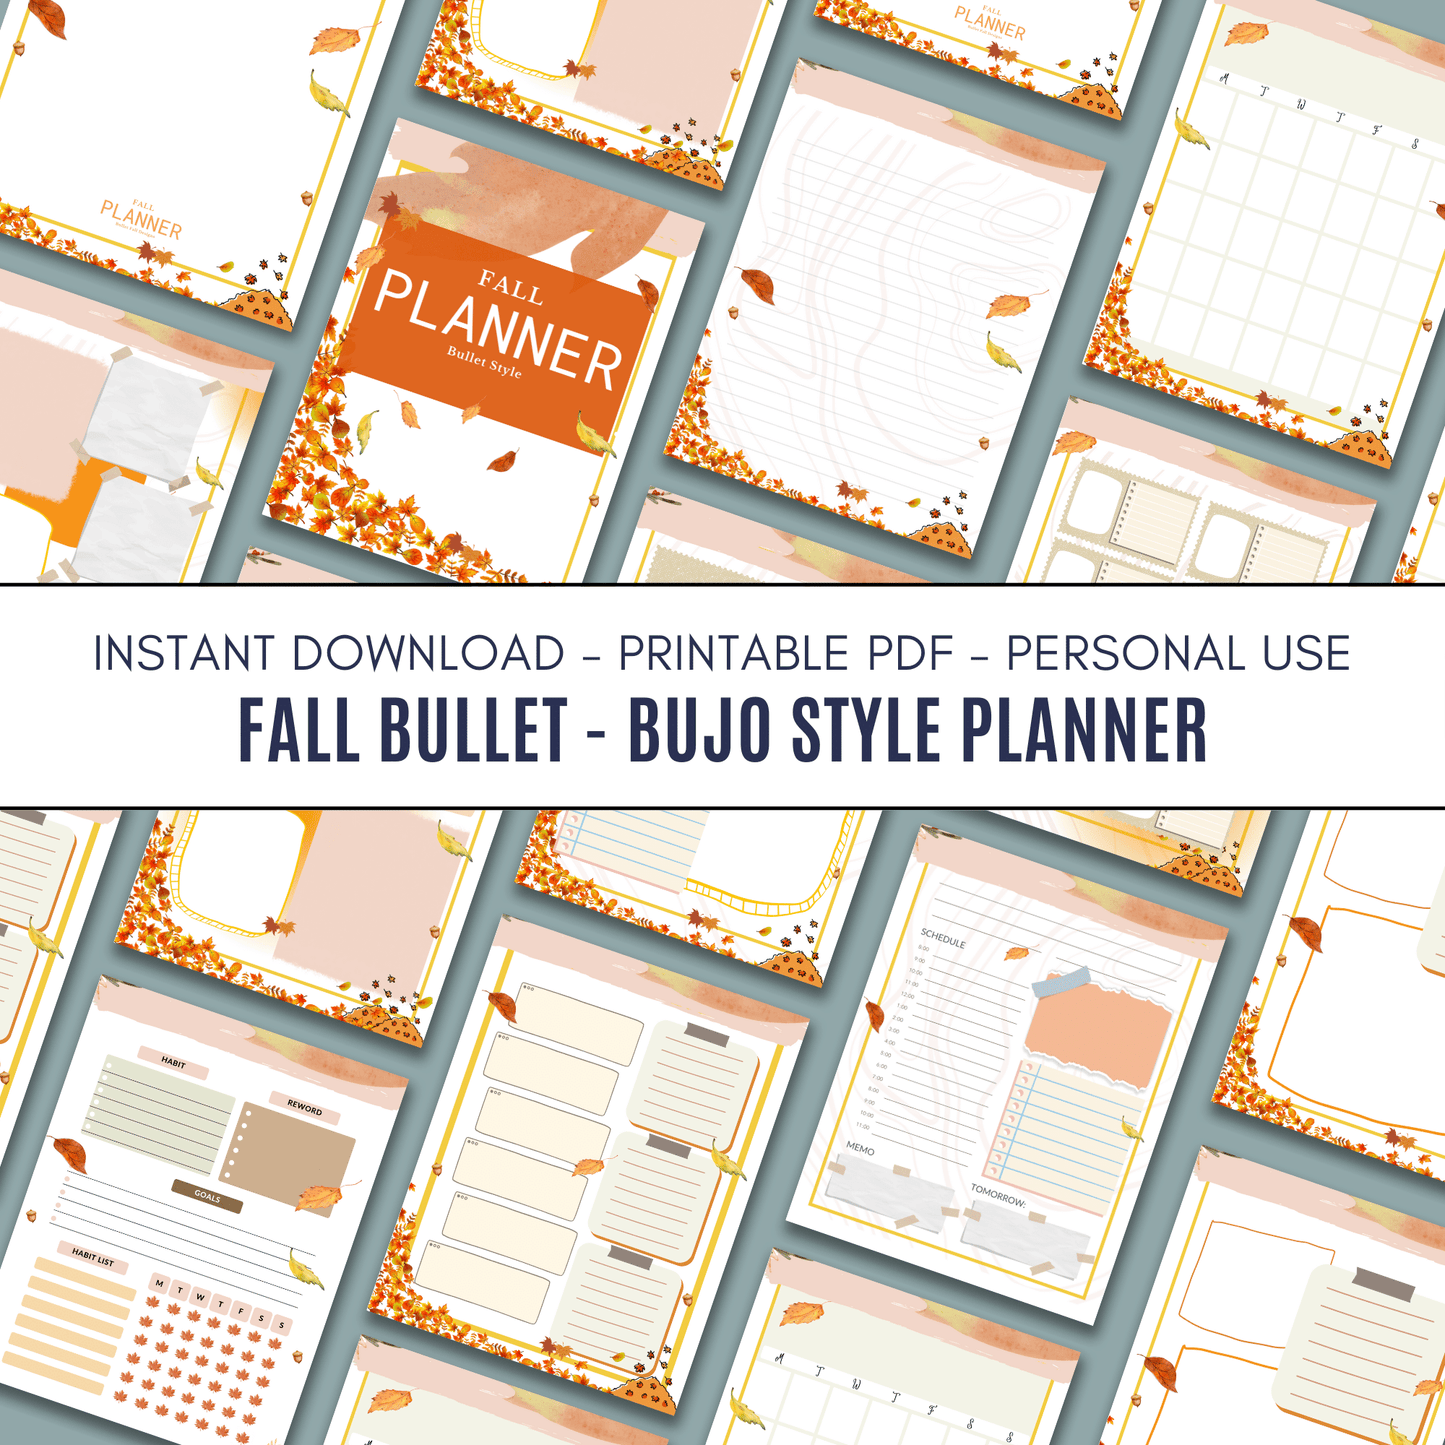 Fall Bullet Style Planner